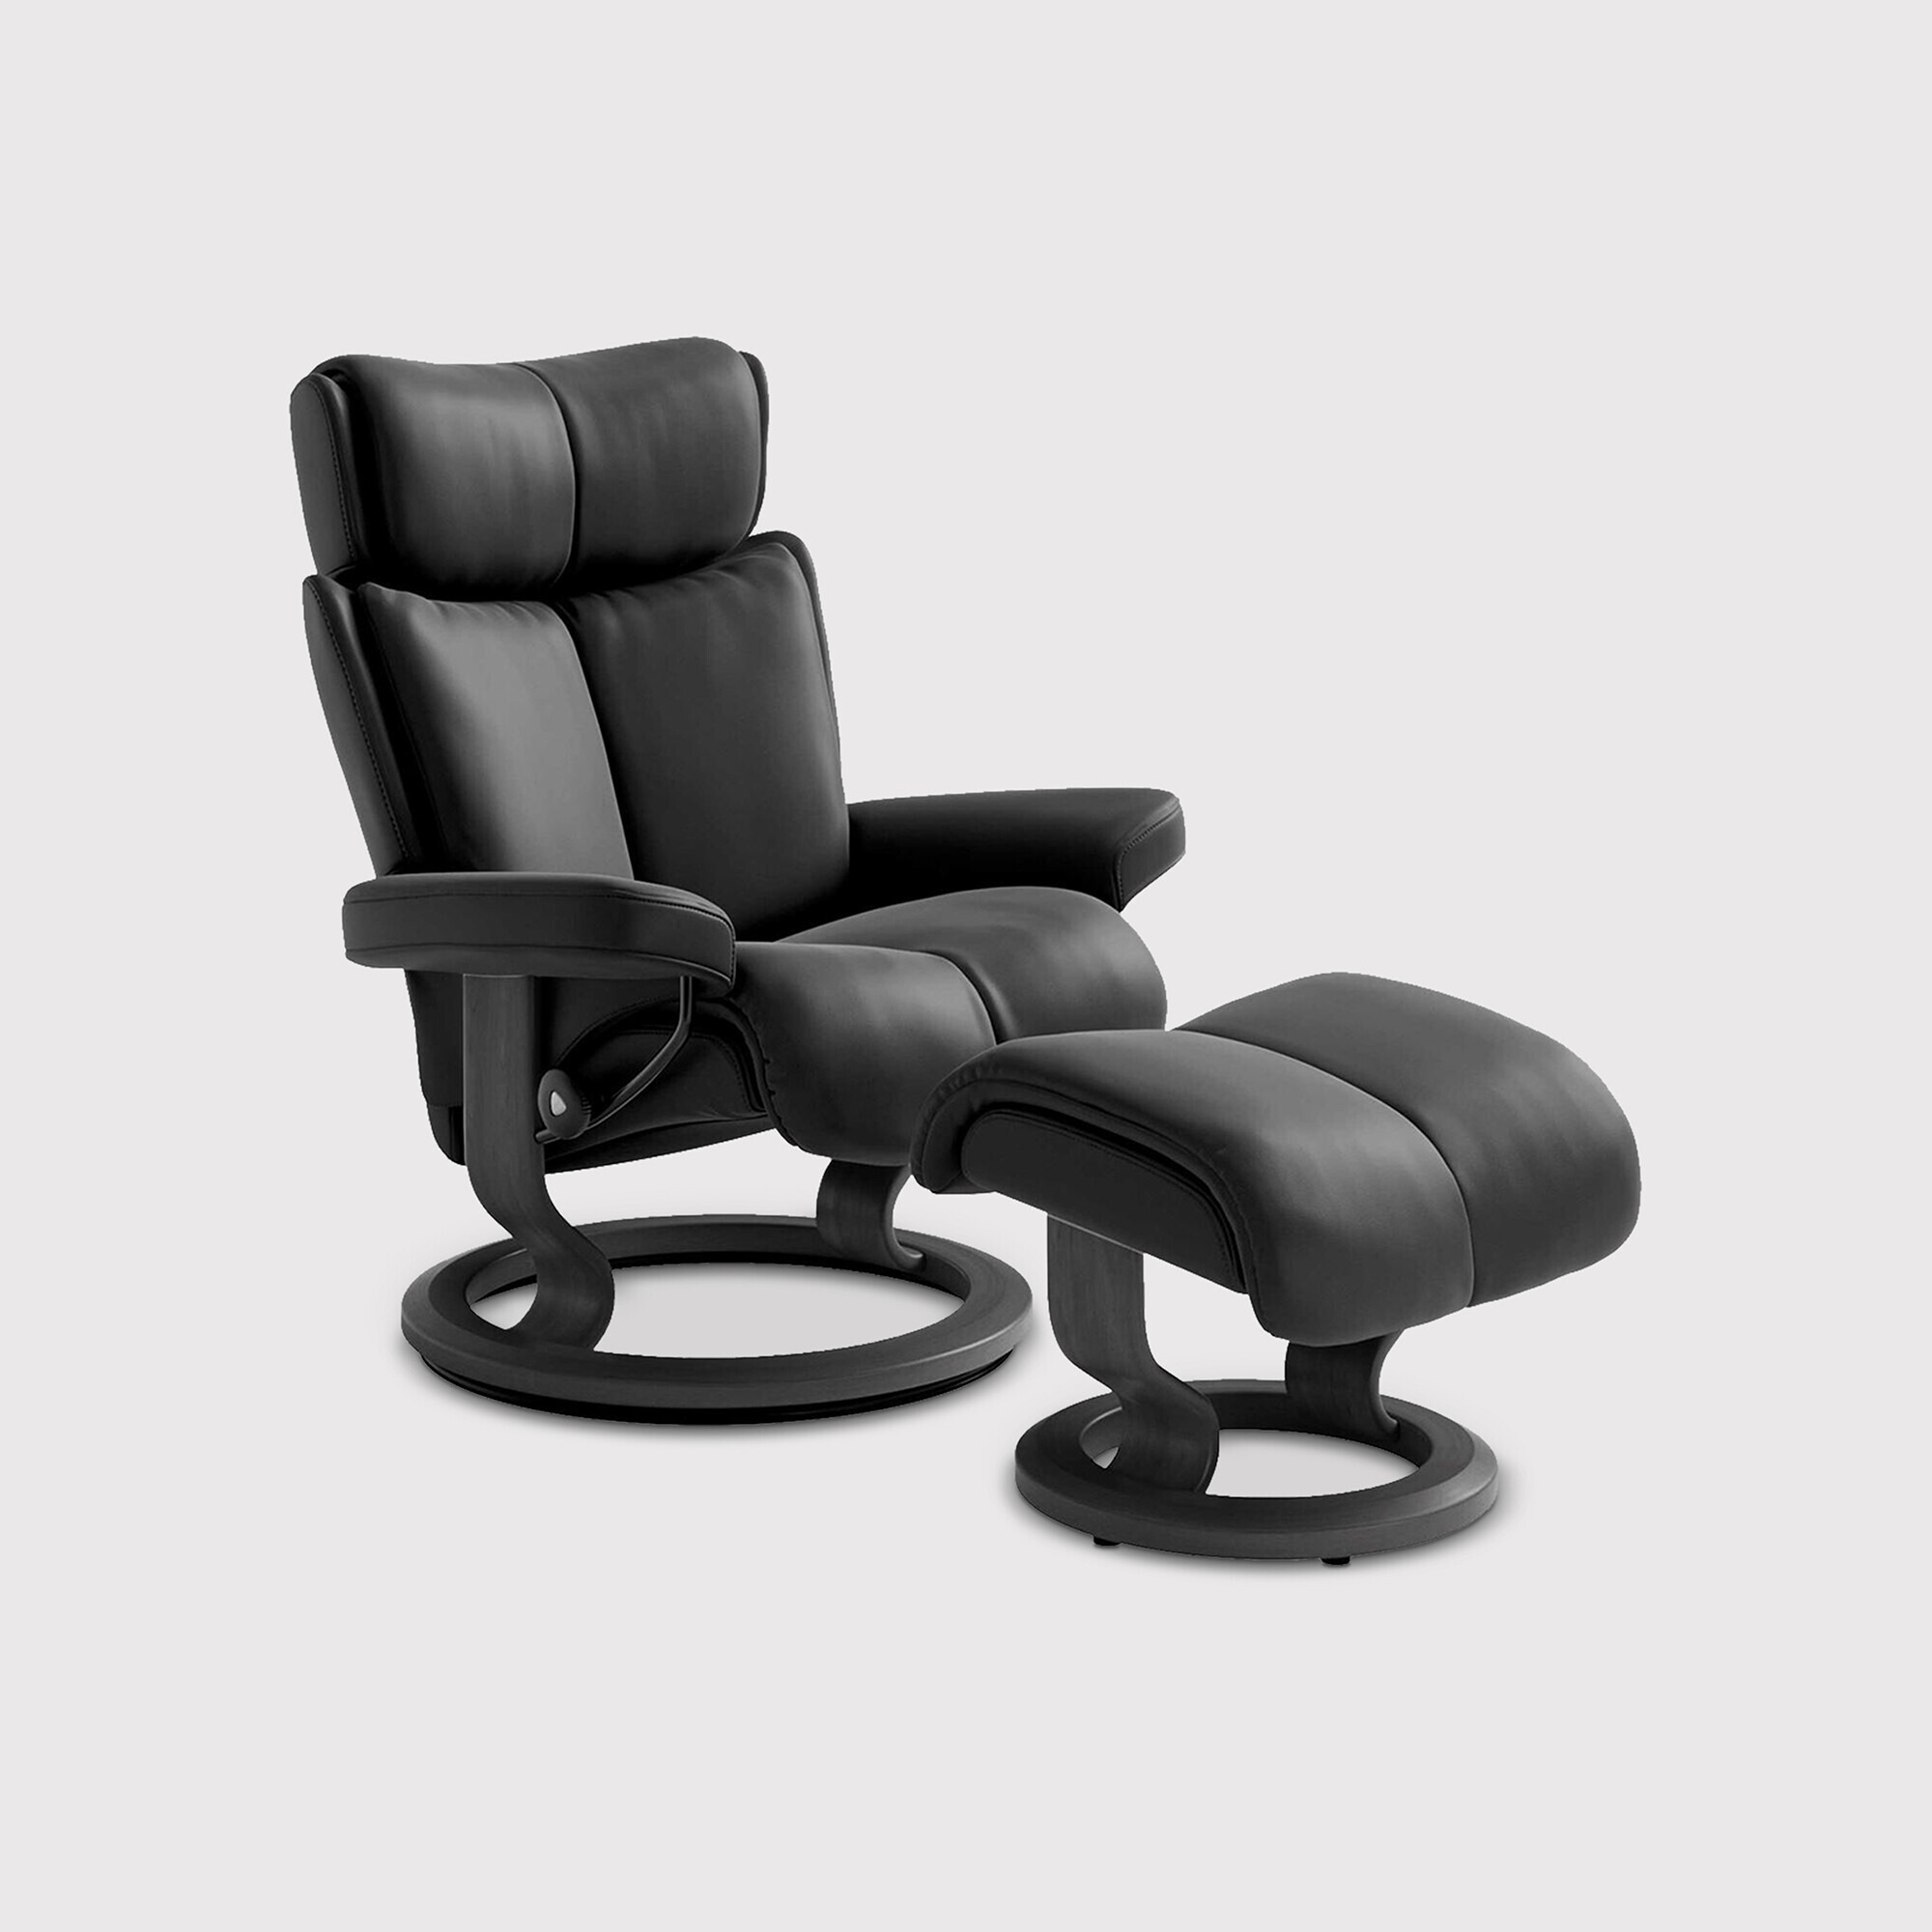 Stressless Magic Small Recliner Chair & Stool With Classic Base, Black Leather - Barker & Stonehouse - image 1